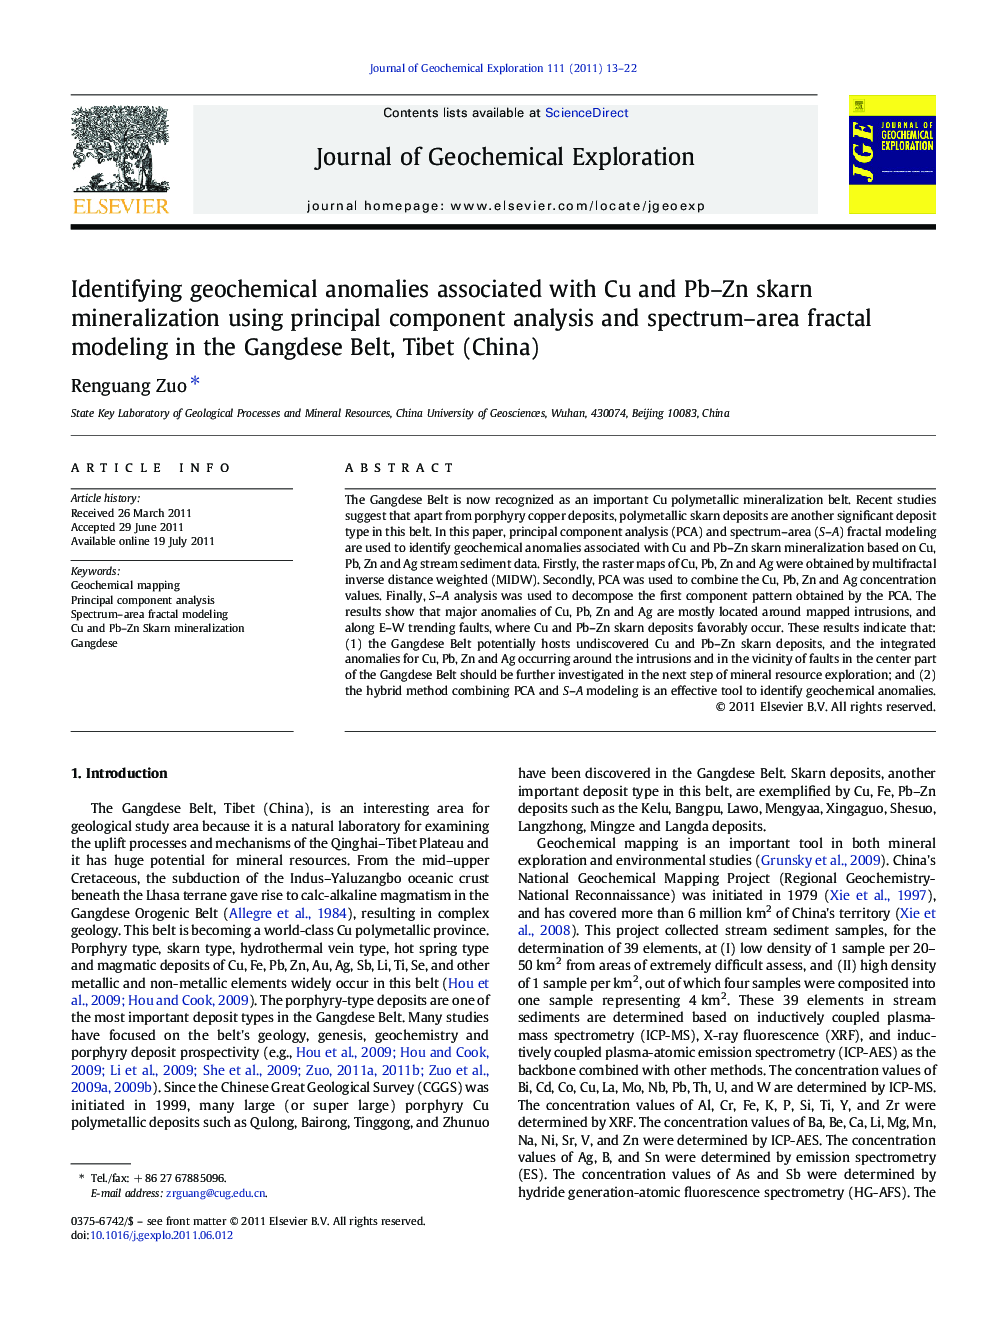 Identifying geochemical anomalies associated with Cu and Pb–Zn skarn mineralization using principal component analysis and spectrum–area fractal modeling in the Gangdese Belt, Tibet (China)